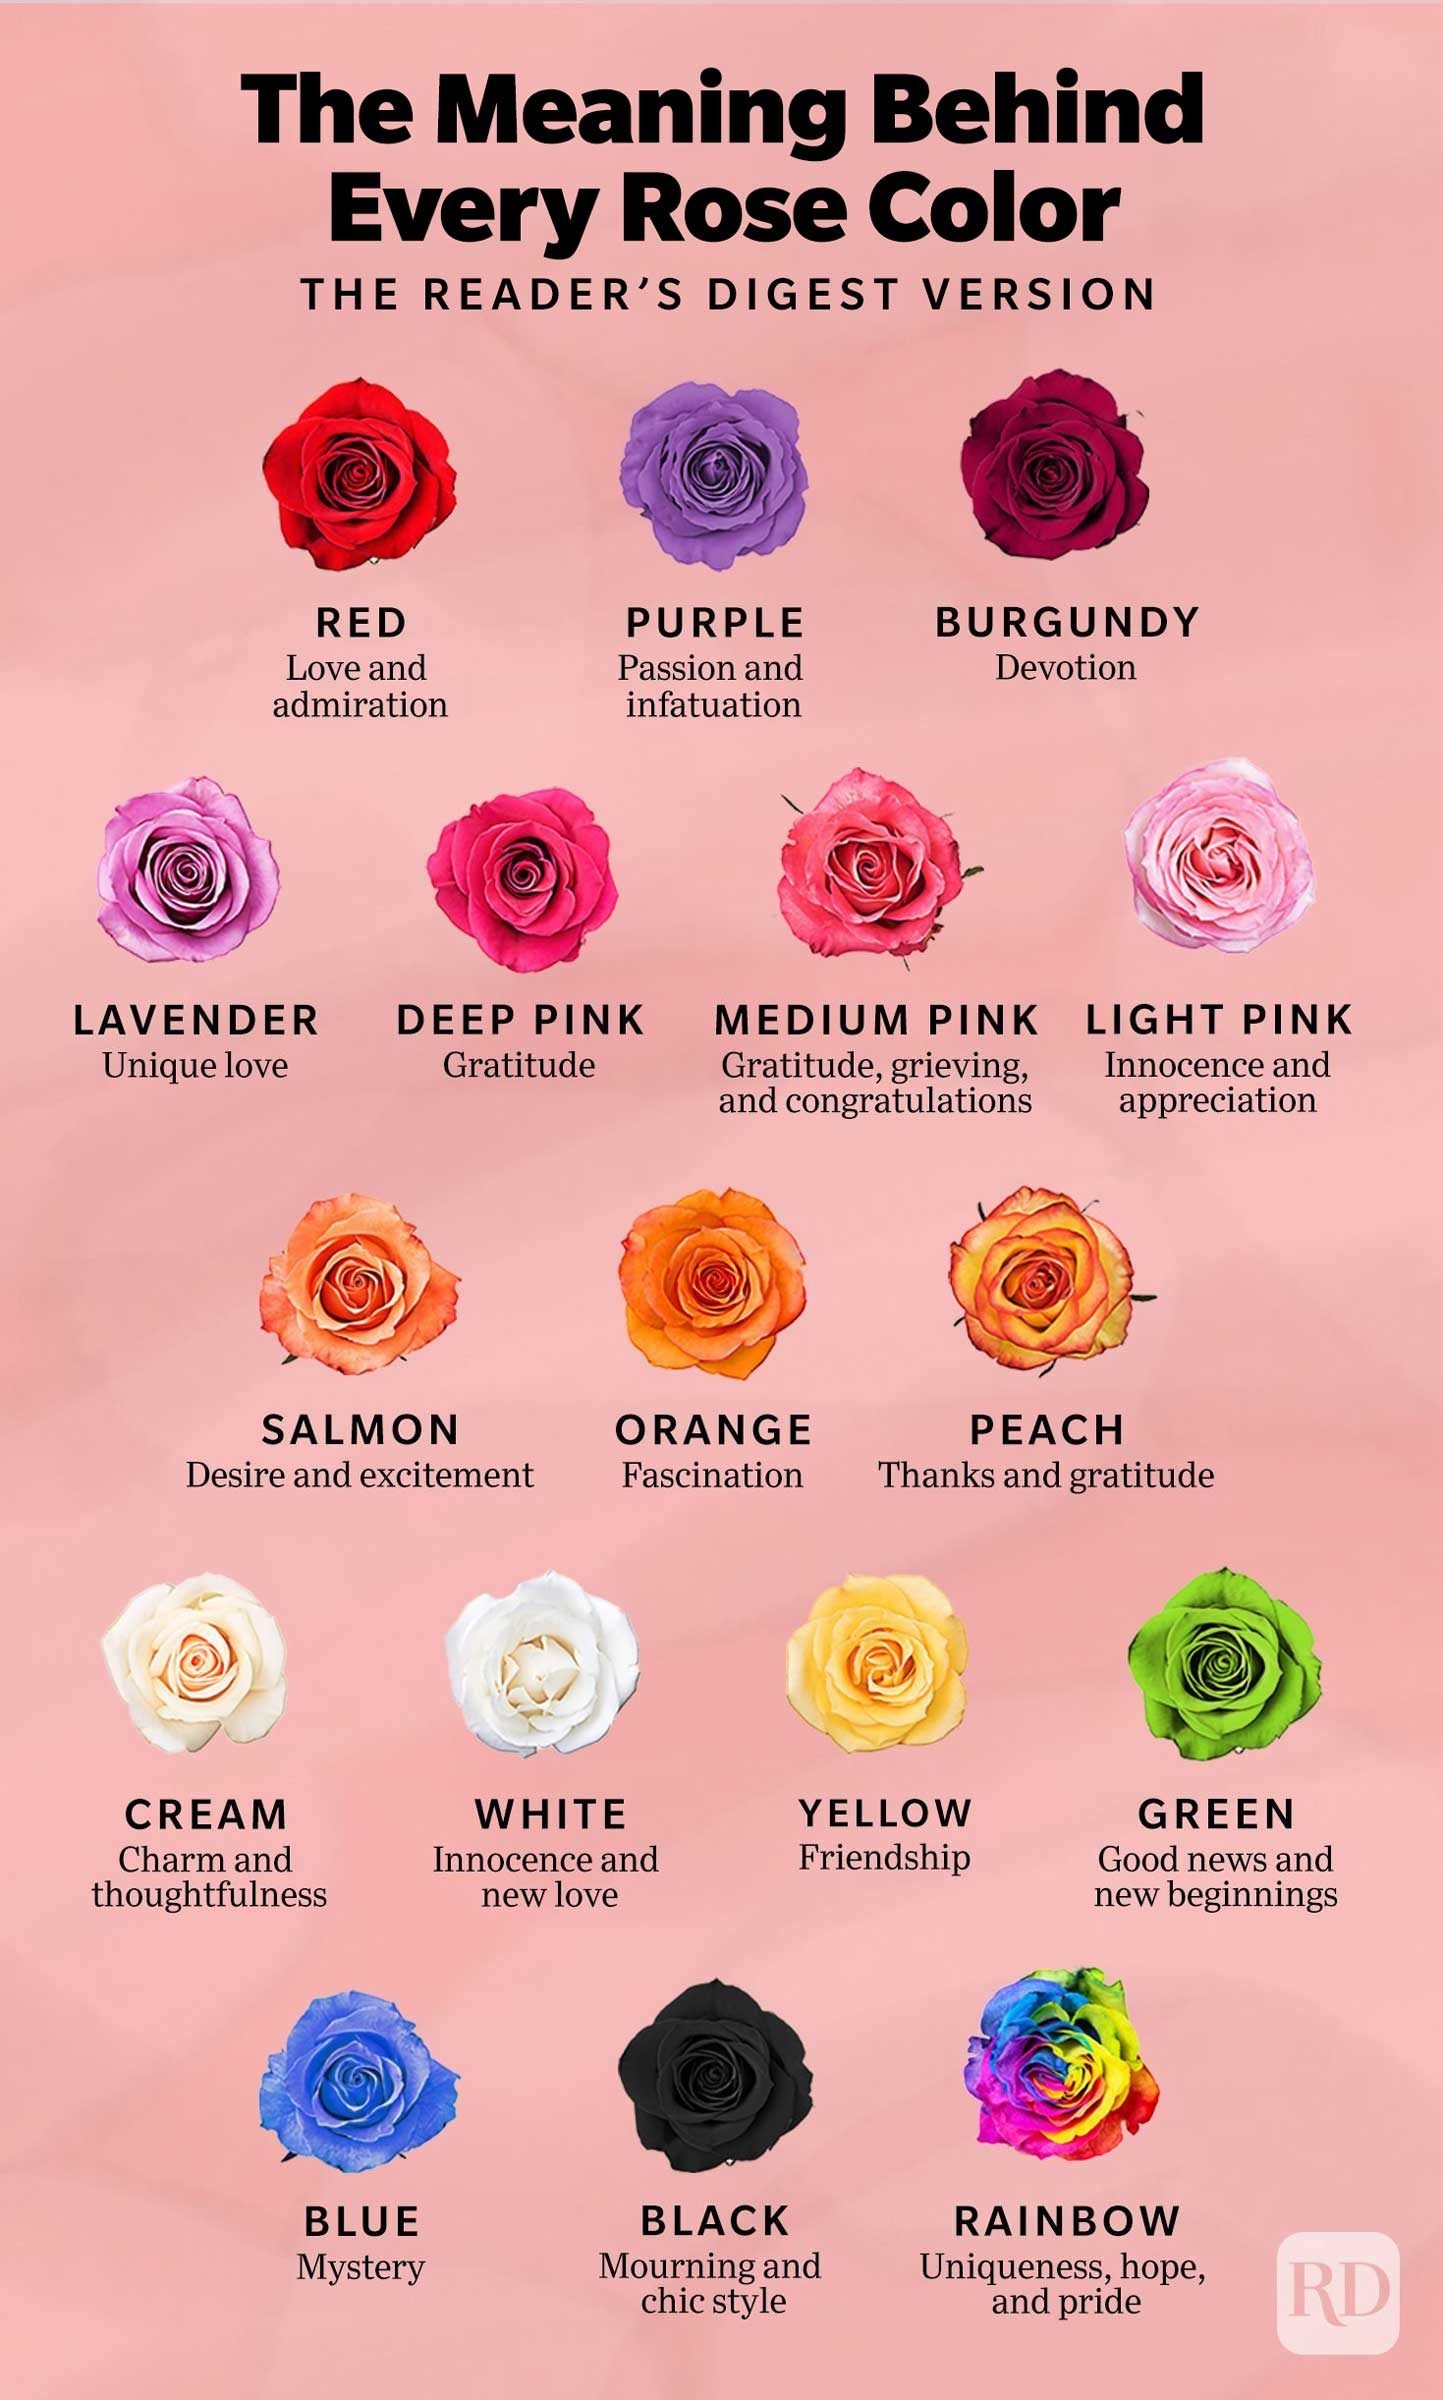 100 Types of Flowers (with Unique Meanings & Images)